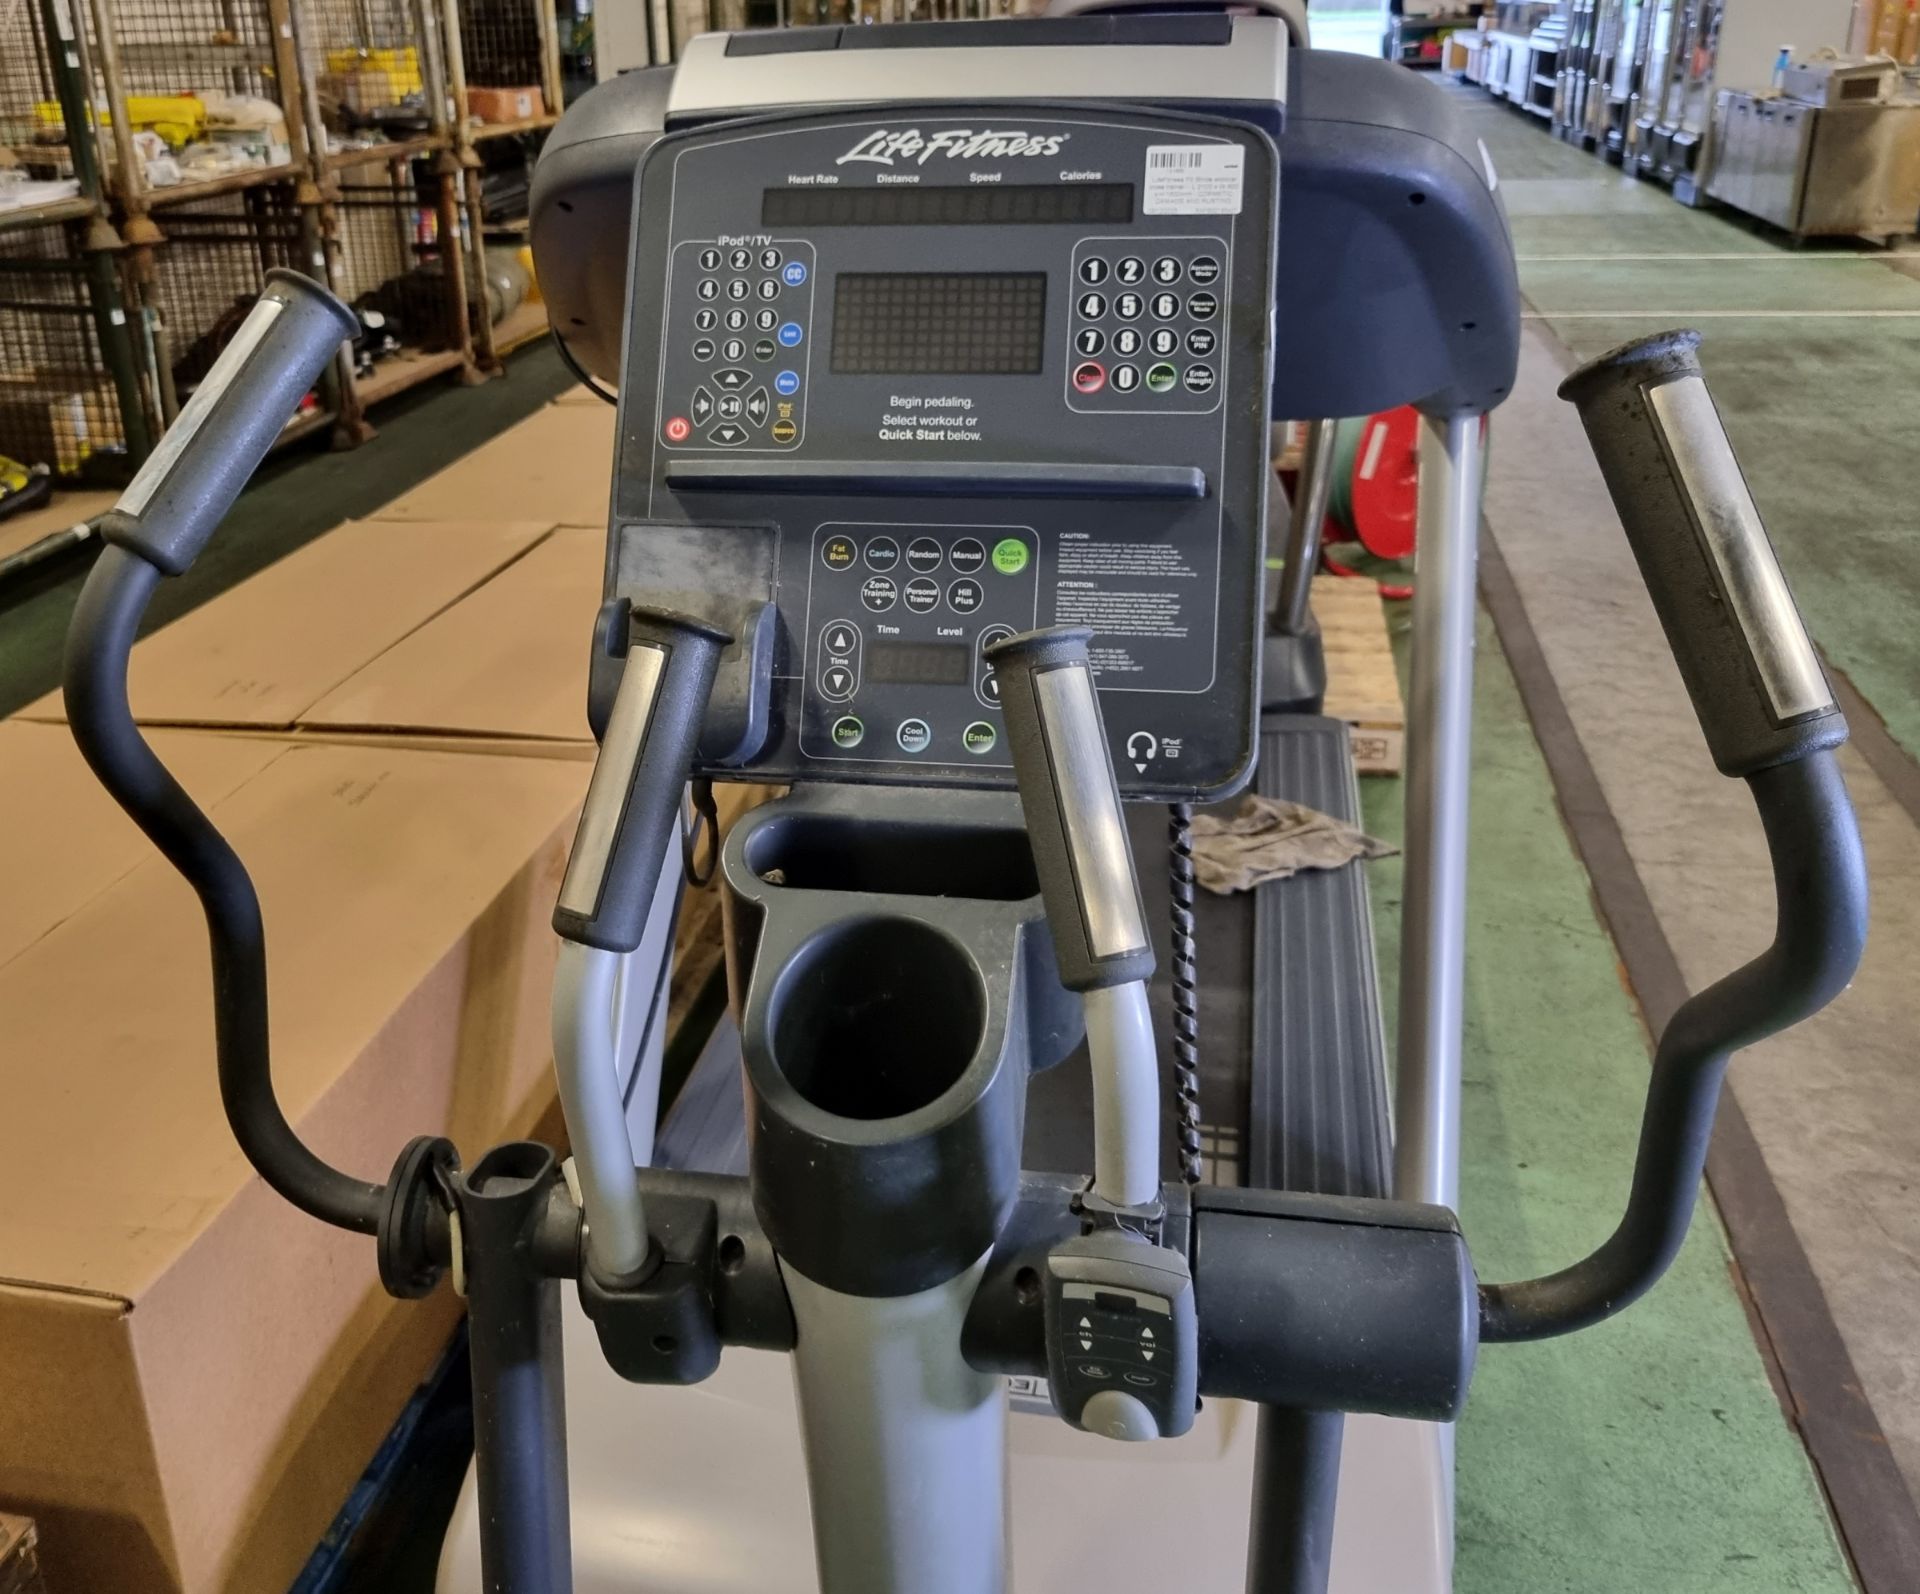 Life Fitness Fit Stride elliptical cross trainer - L 2100 x W 800 x H 1600mm - DAMAGE AND RUSTING - Image 4 of 9